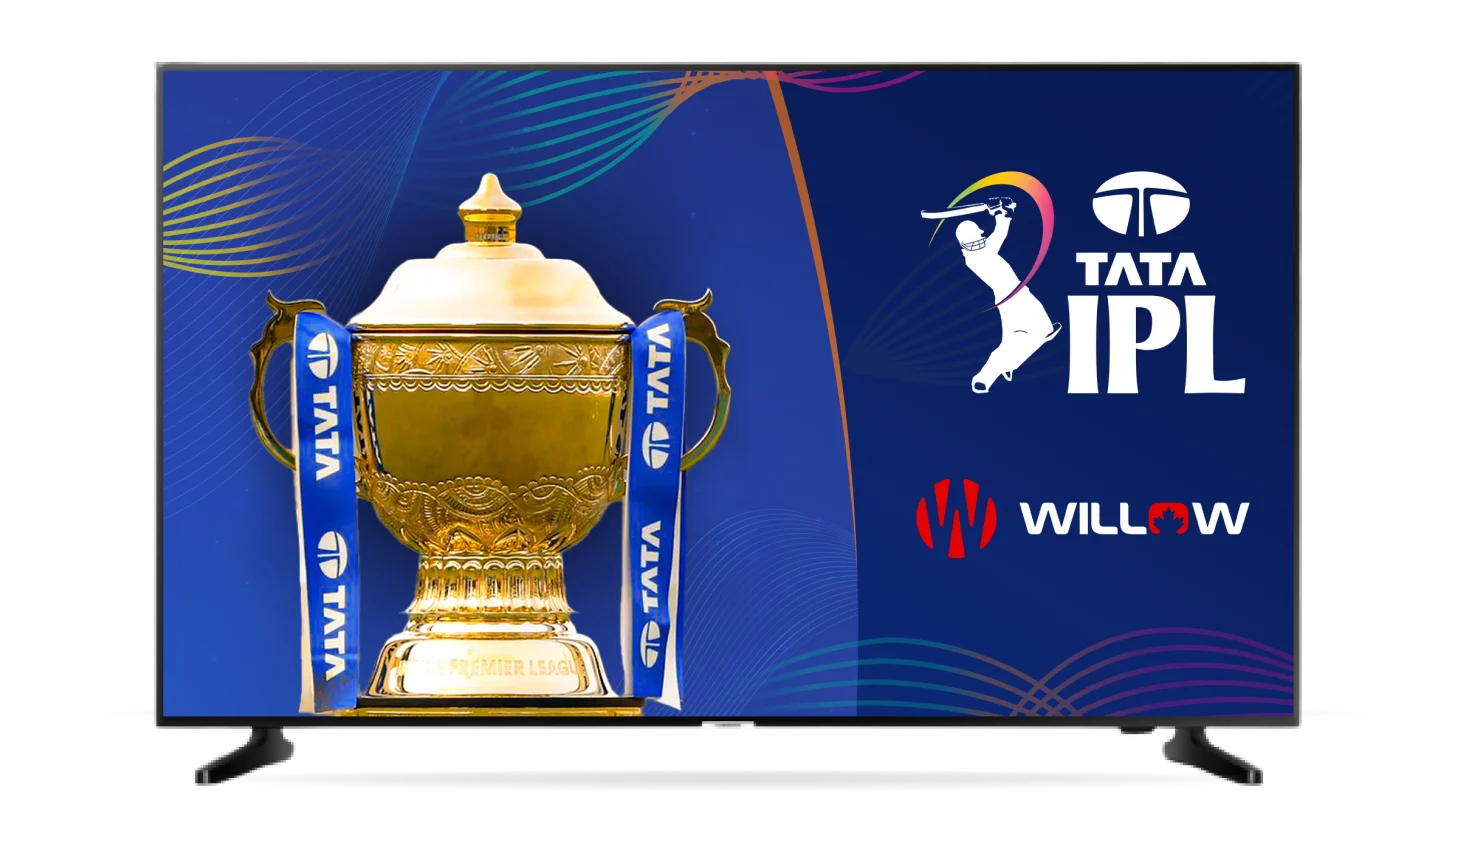 On a television screen, the Indian Premier League logo is displayed, marking the commencement of this year's tournament.